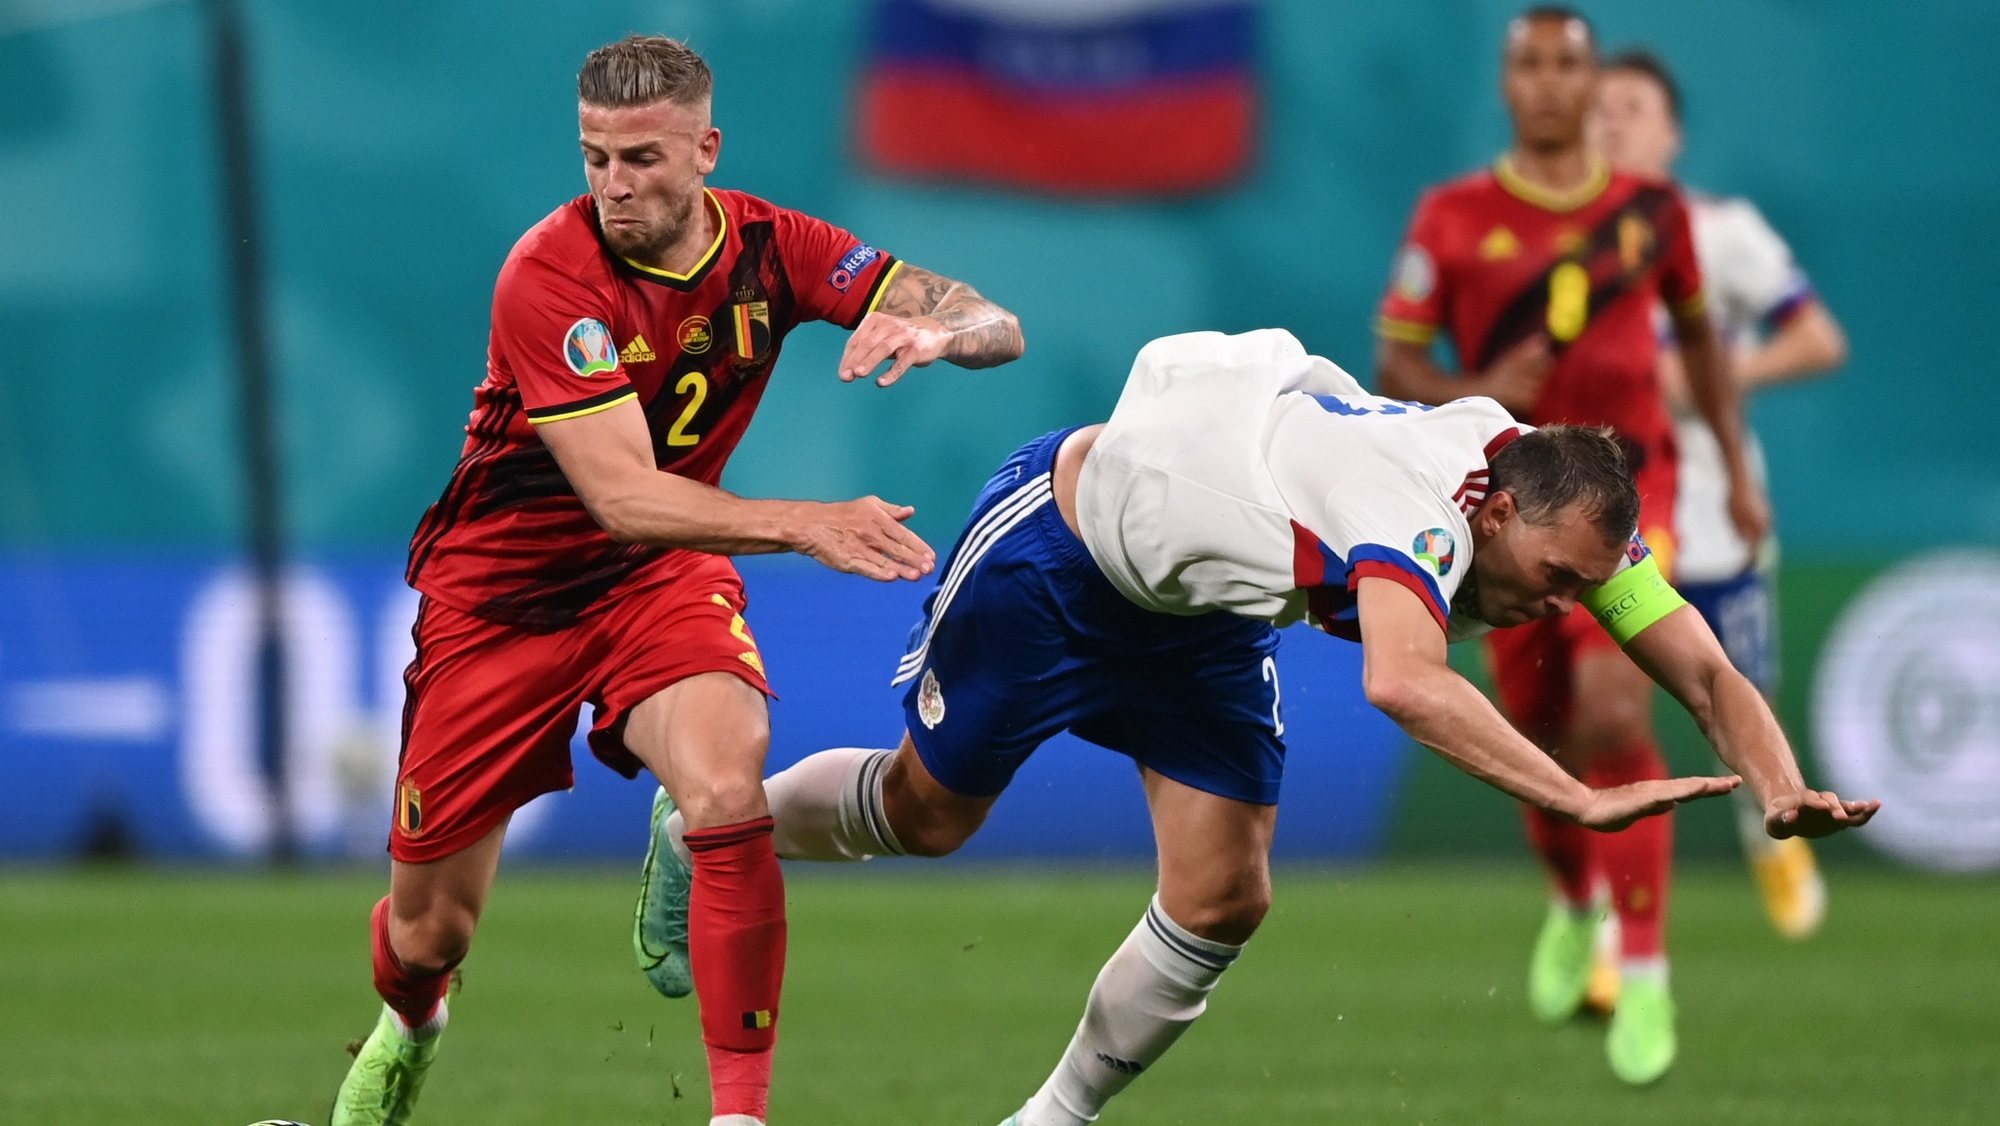 epa09266066 Toby Alderweireld of Belgium (L) in action against Artem Dzyuba of Russia during the UEFA EURO 2020 group B preliminary round soccer match between  Belgium and Russia in St.Petersburg, Russia, 12 June 2021.  EPA/Kirill Kudryavtsev / POOL (RESTRICTIONS: For editorial news reporting purposes only. Images must appear as still images and must not emulate match action video footage. Photographs published in online publications shall have an interval of at least 20 seconds between the posting.)